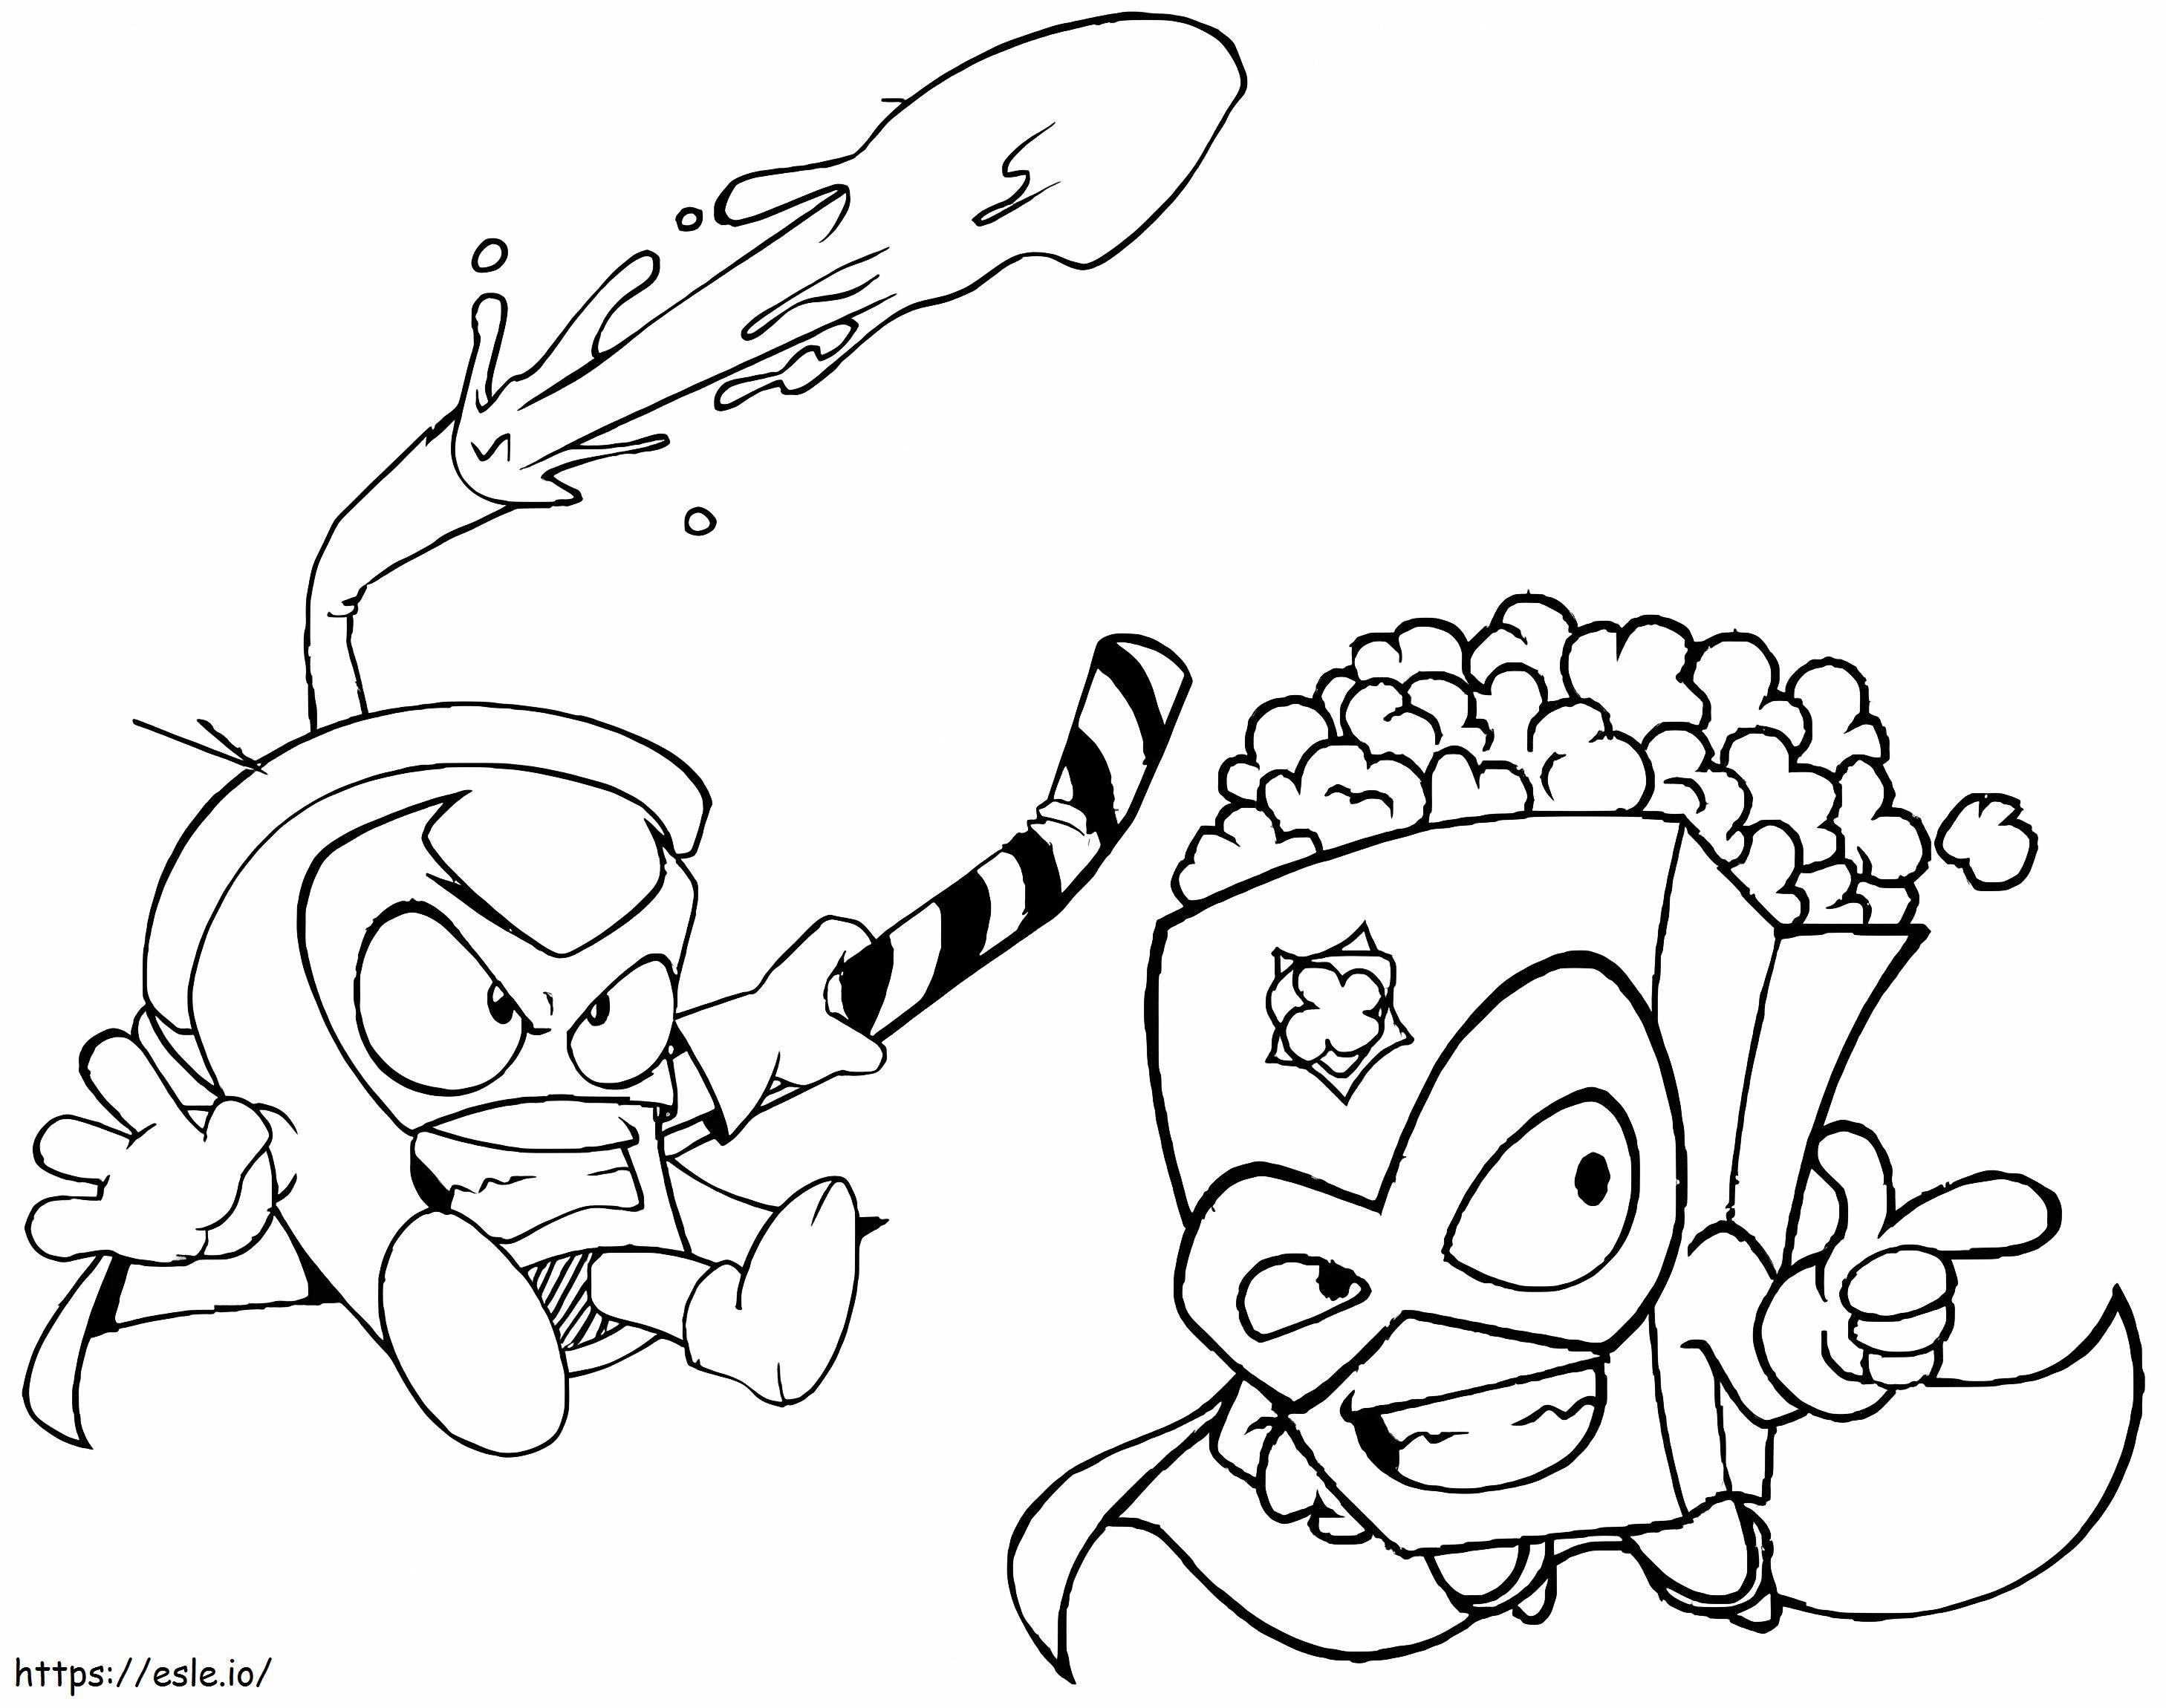 Pop Corn And Sugar Rush Superzings coloring page